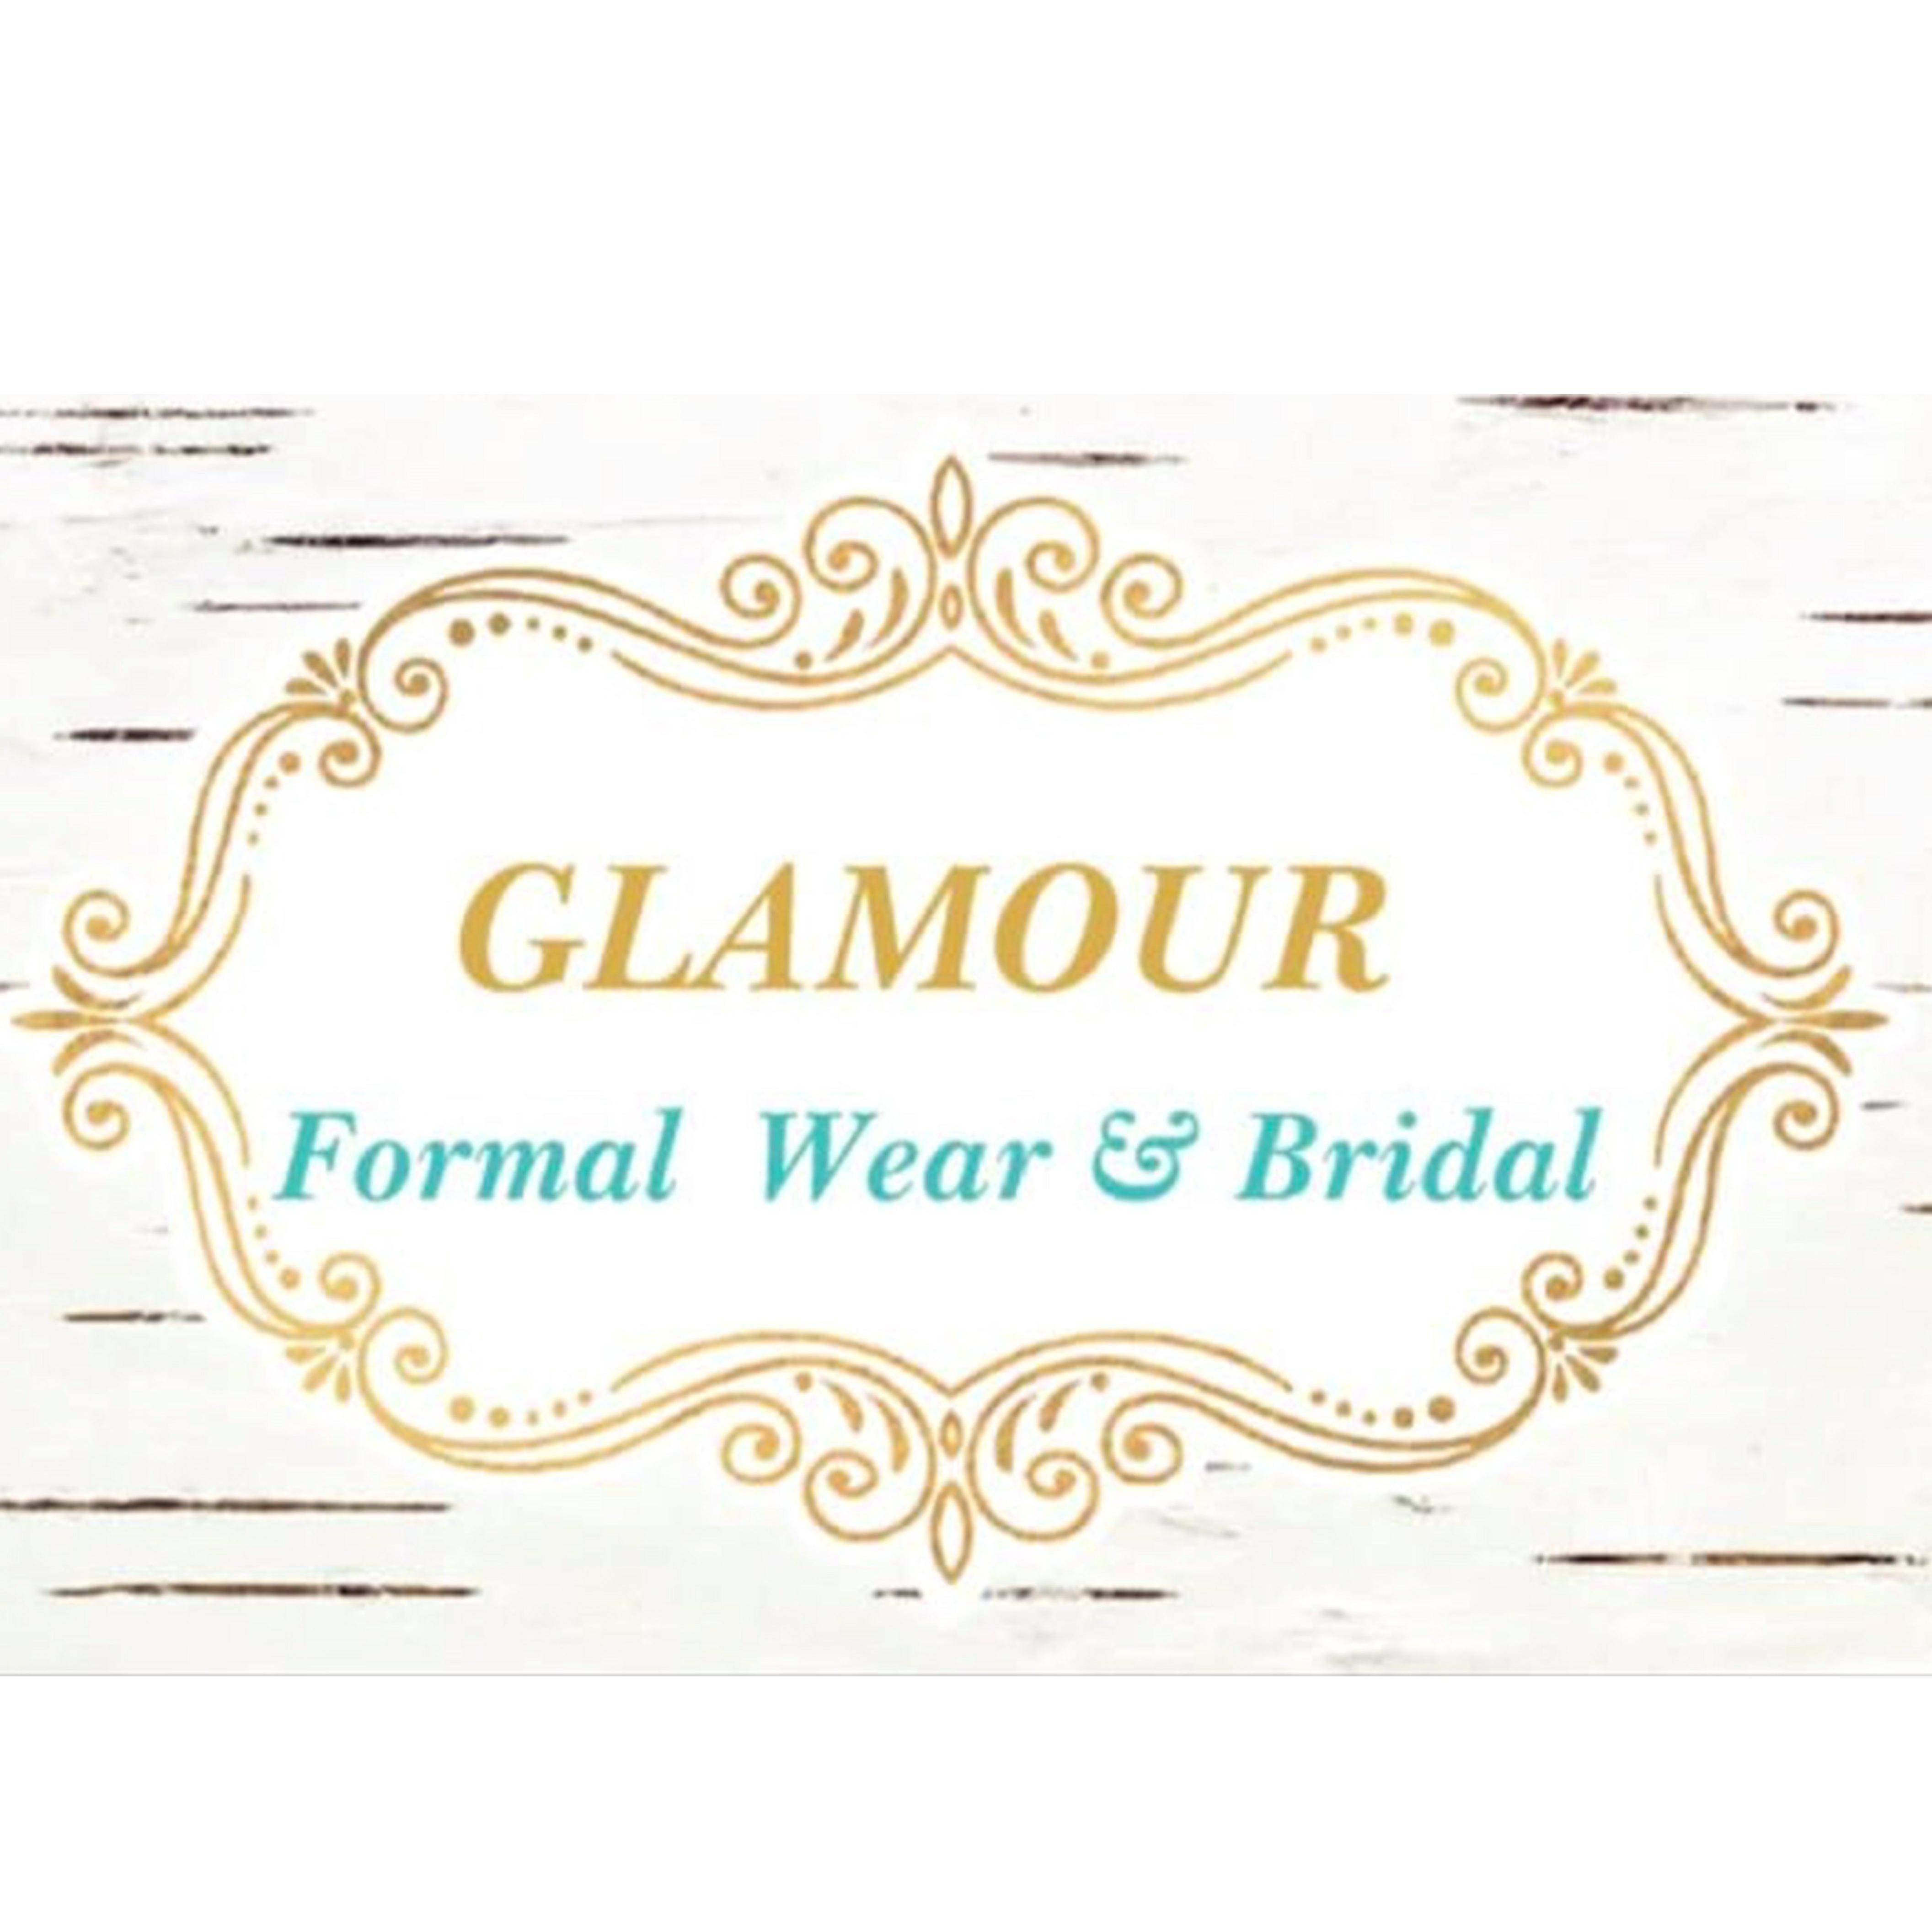 Glamour Formal Wear and Bridal Logo